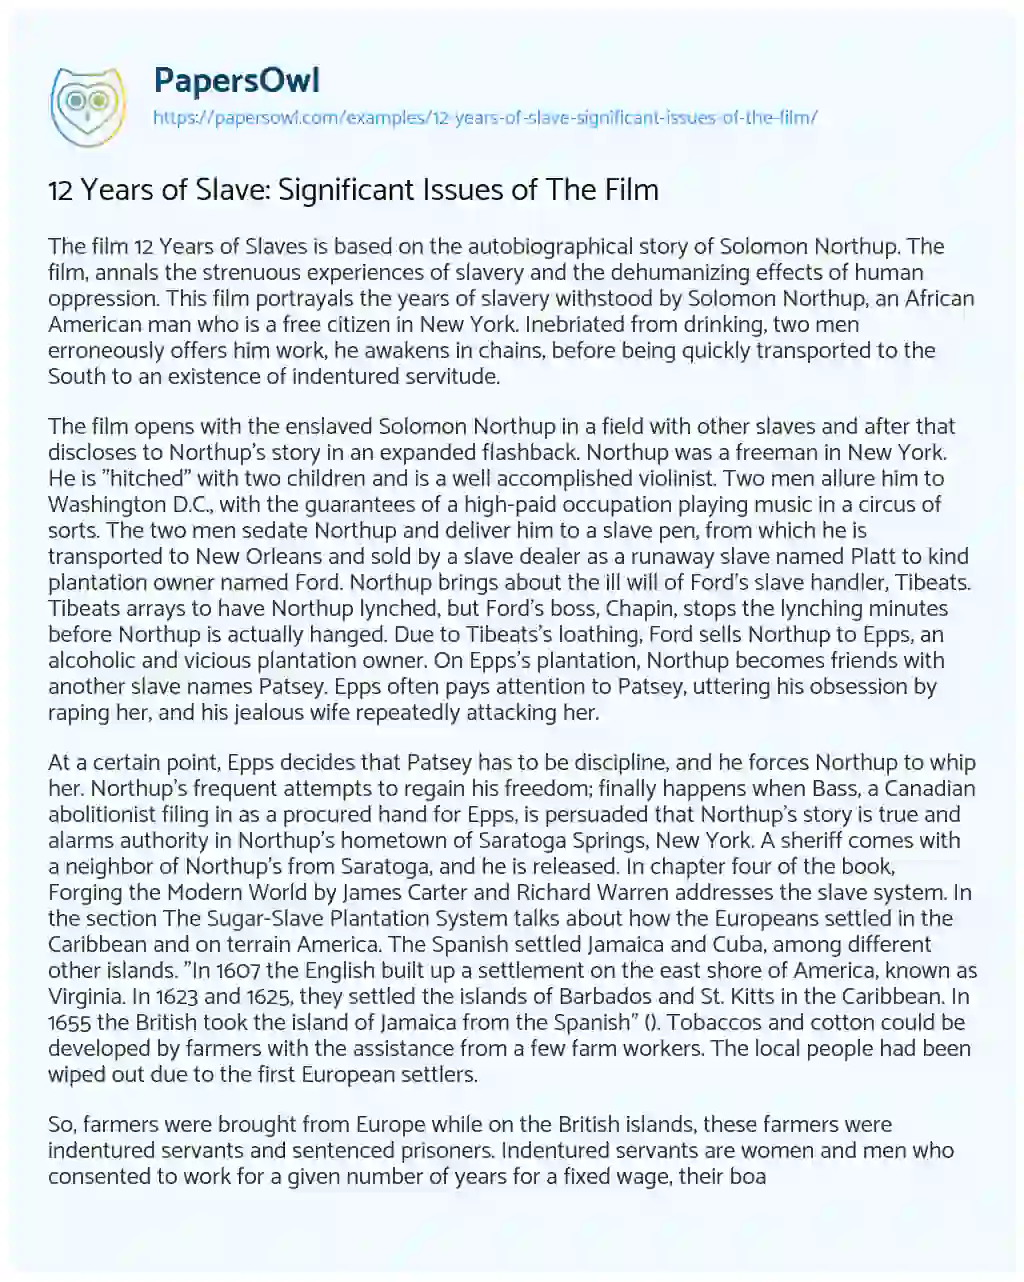 Essay on 12 Years of Slave: Significant Issues of the Film